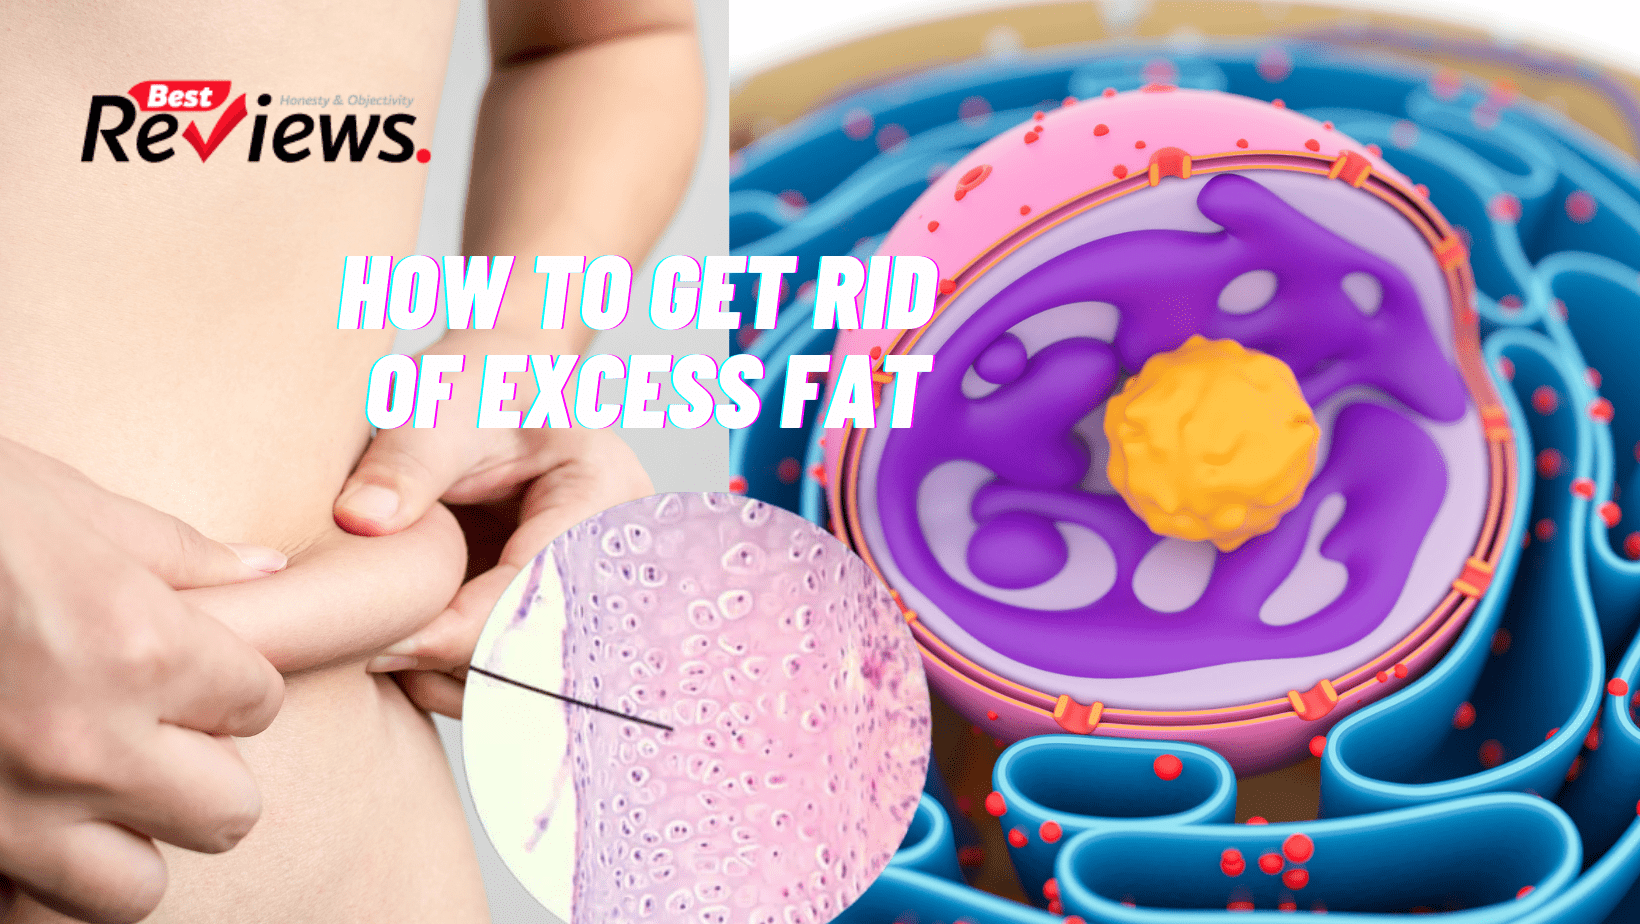 How to get rid of excess fat